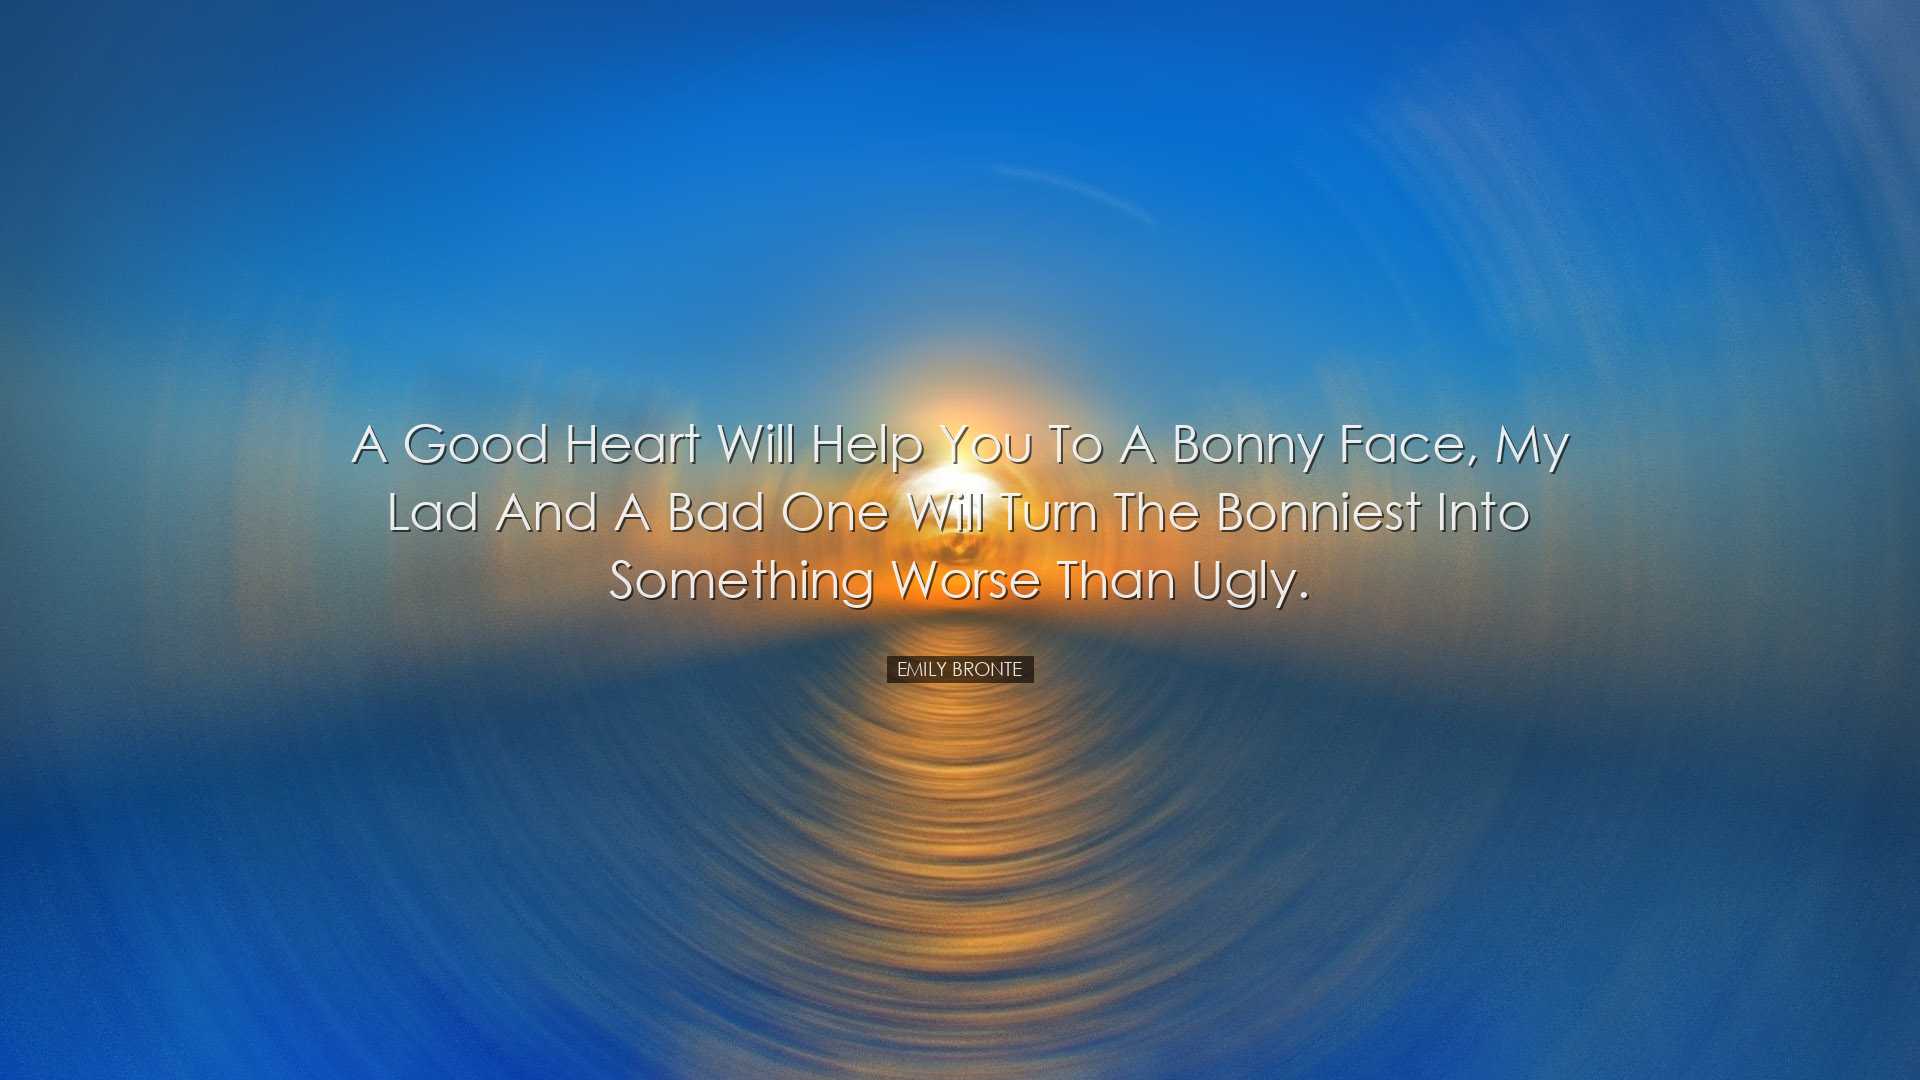 A good heart will help you to a bonny face, my lad and a bad one w